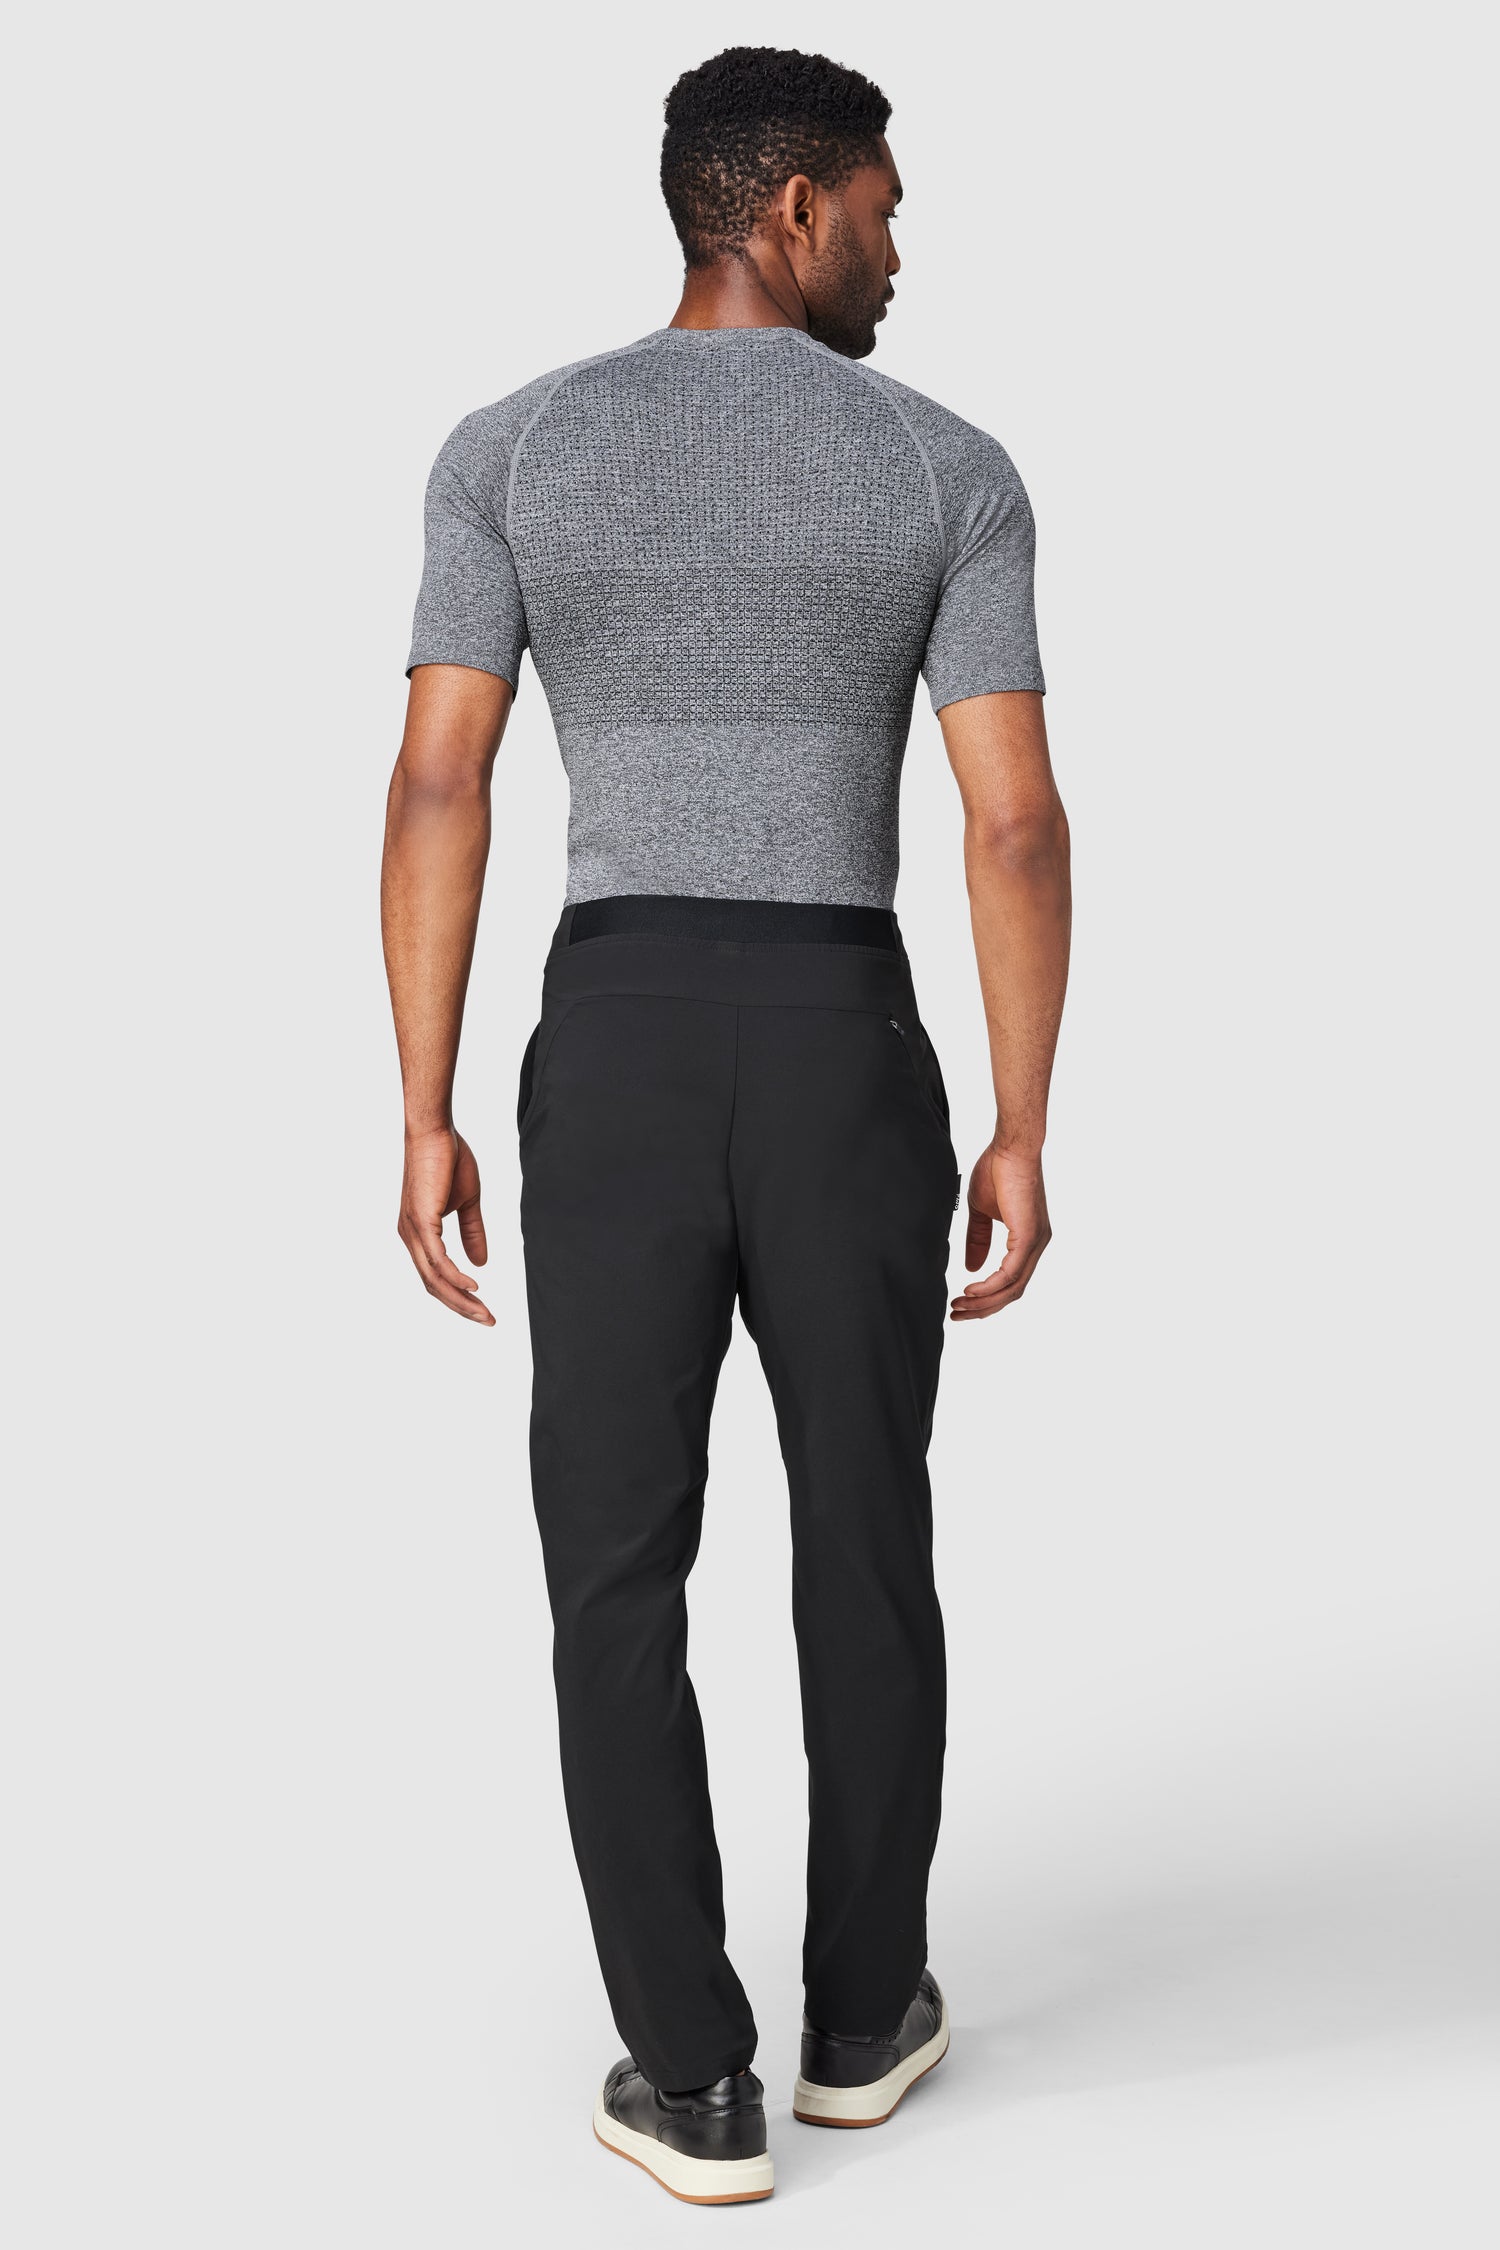 Friday FWD Men's Stretch Commuter Pant - FRIDAYFWD - KEYLOOK - 3